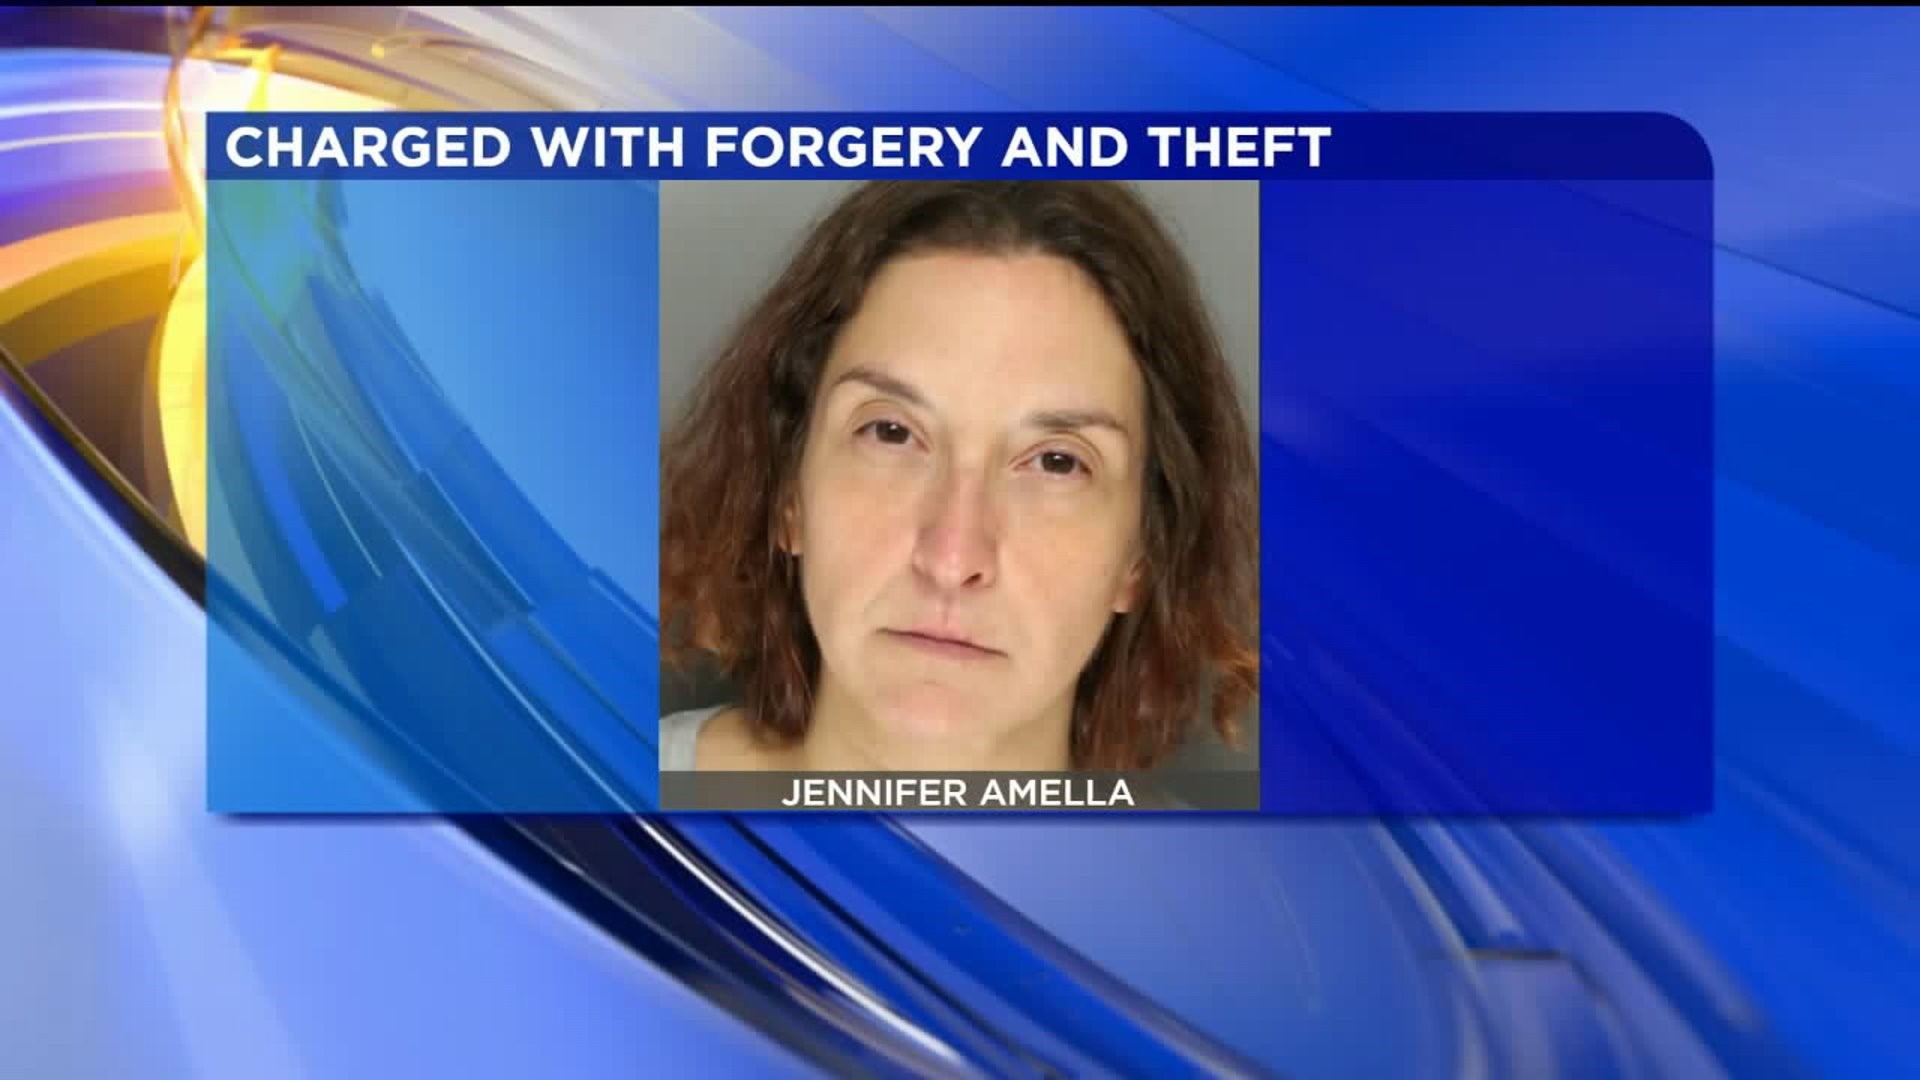 Monroe County Woman Accused of Stealing, Forging Hundreds of Dollars in Checks